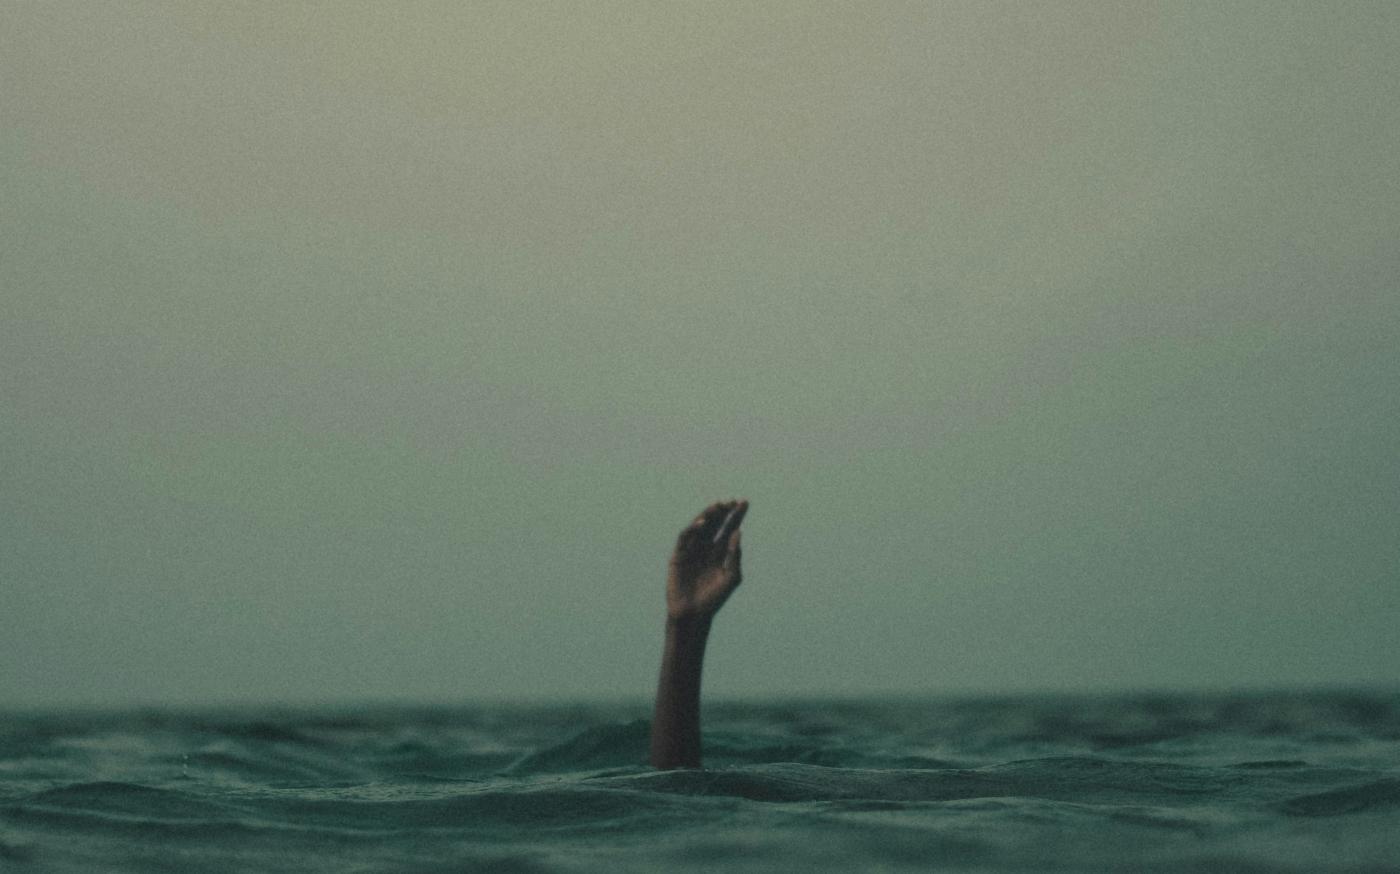 person with hand above water by Mishal Ibrahim courtesy of Unsplash.